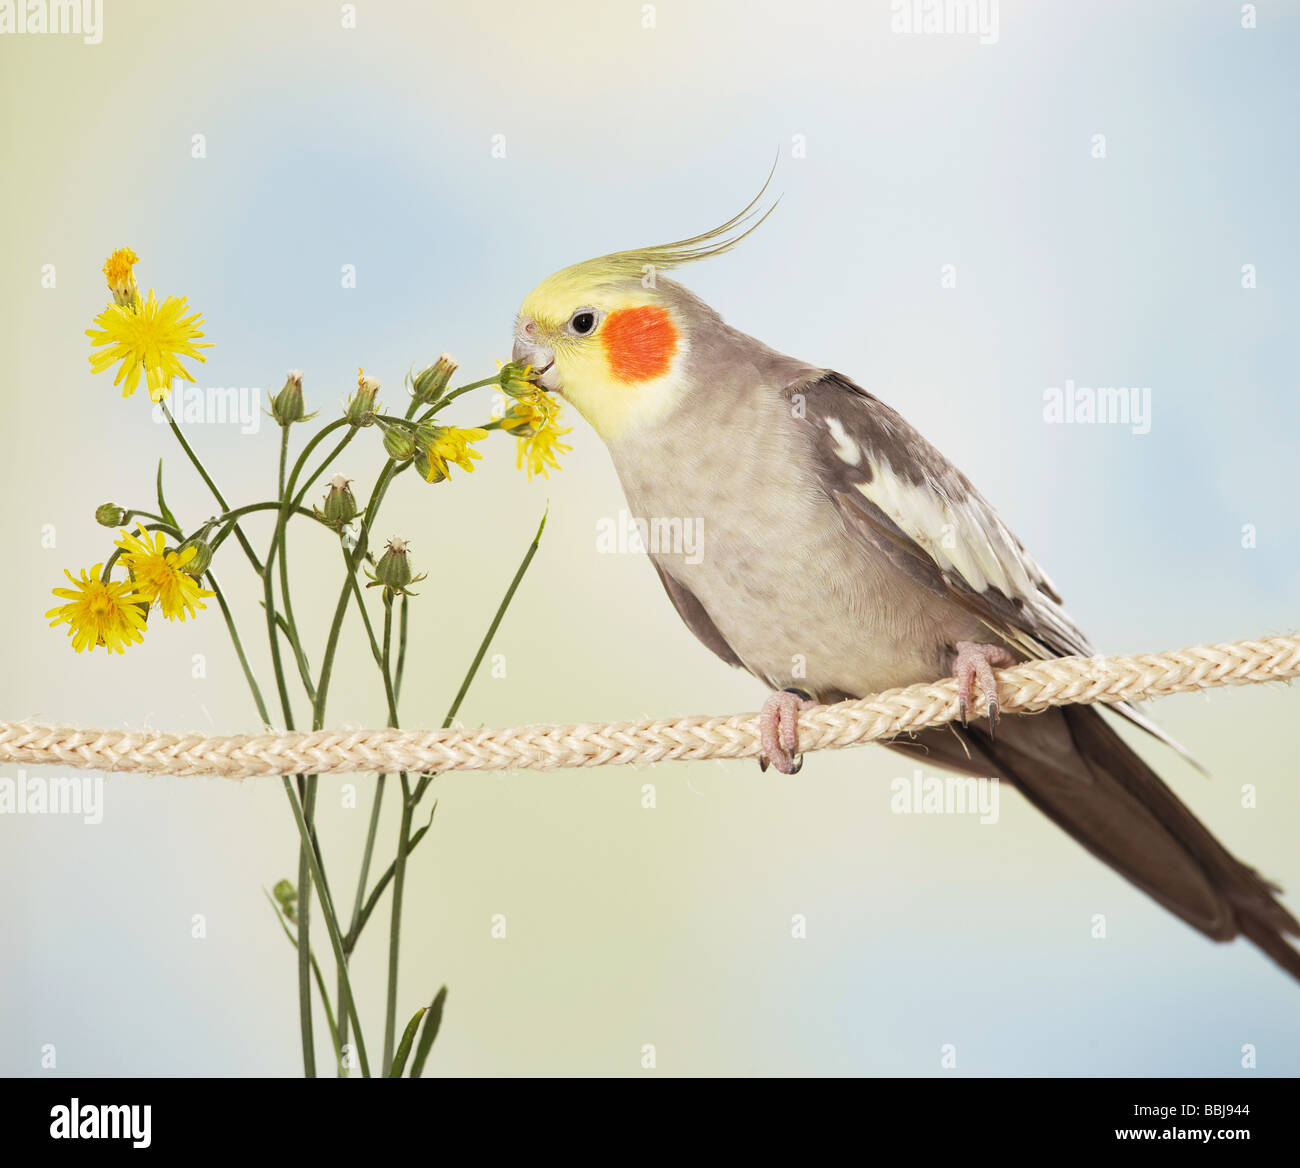 Cockatiel (Nymphicus hollandicus) perched on a rope, eating Common Nipplewort flowers Stock Photo